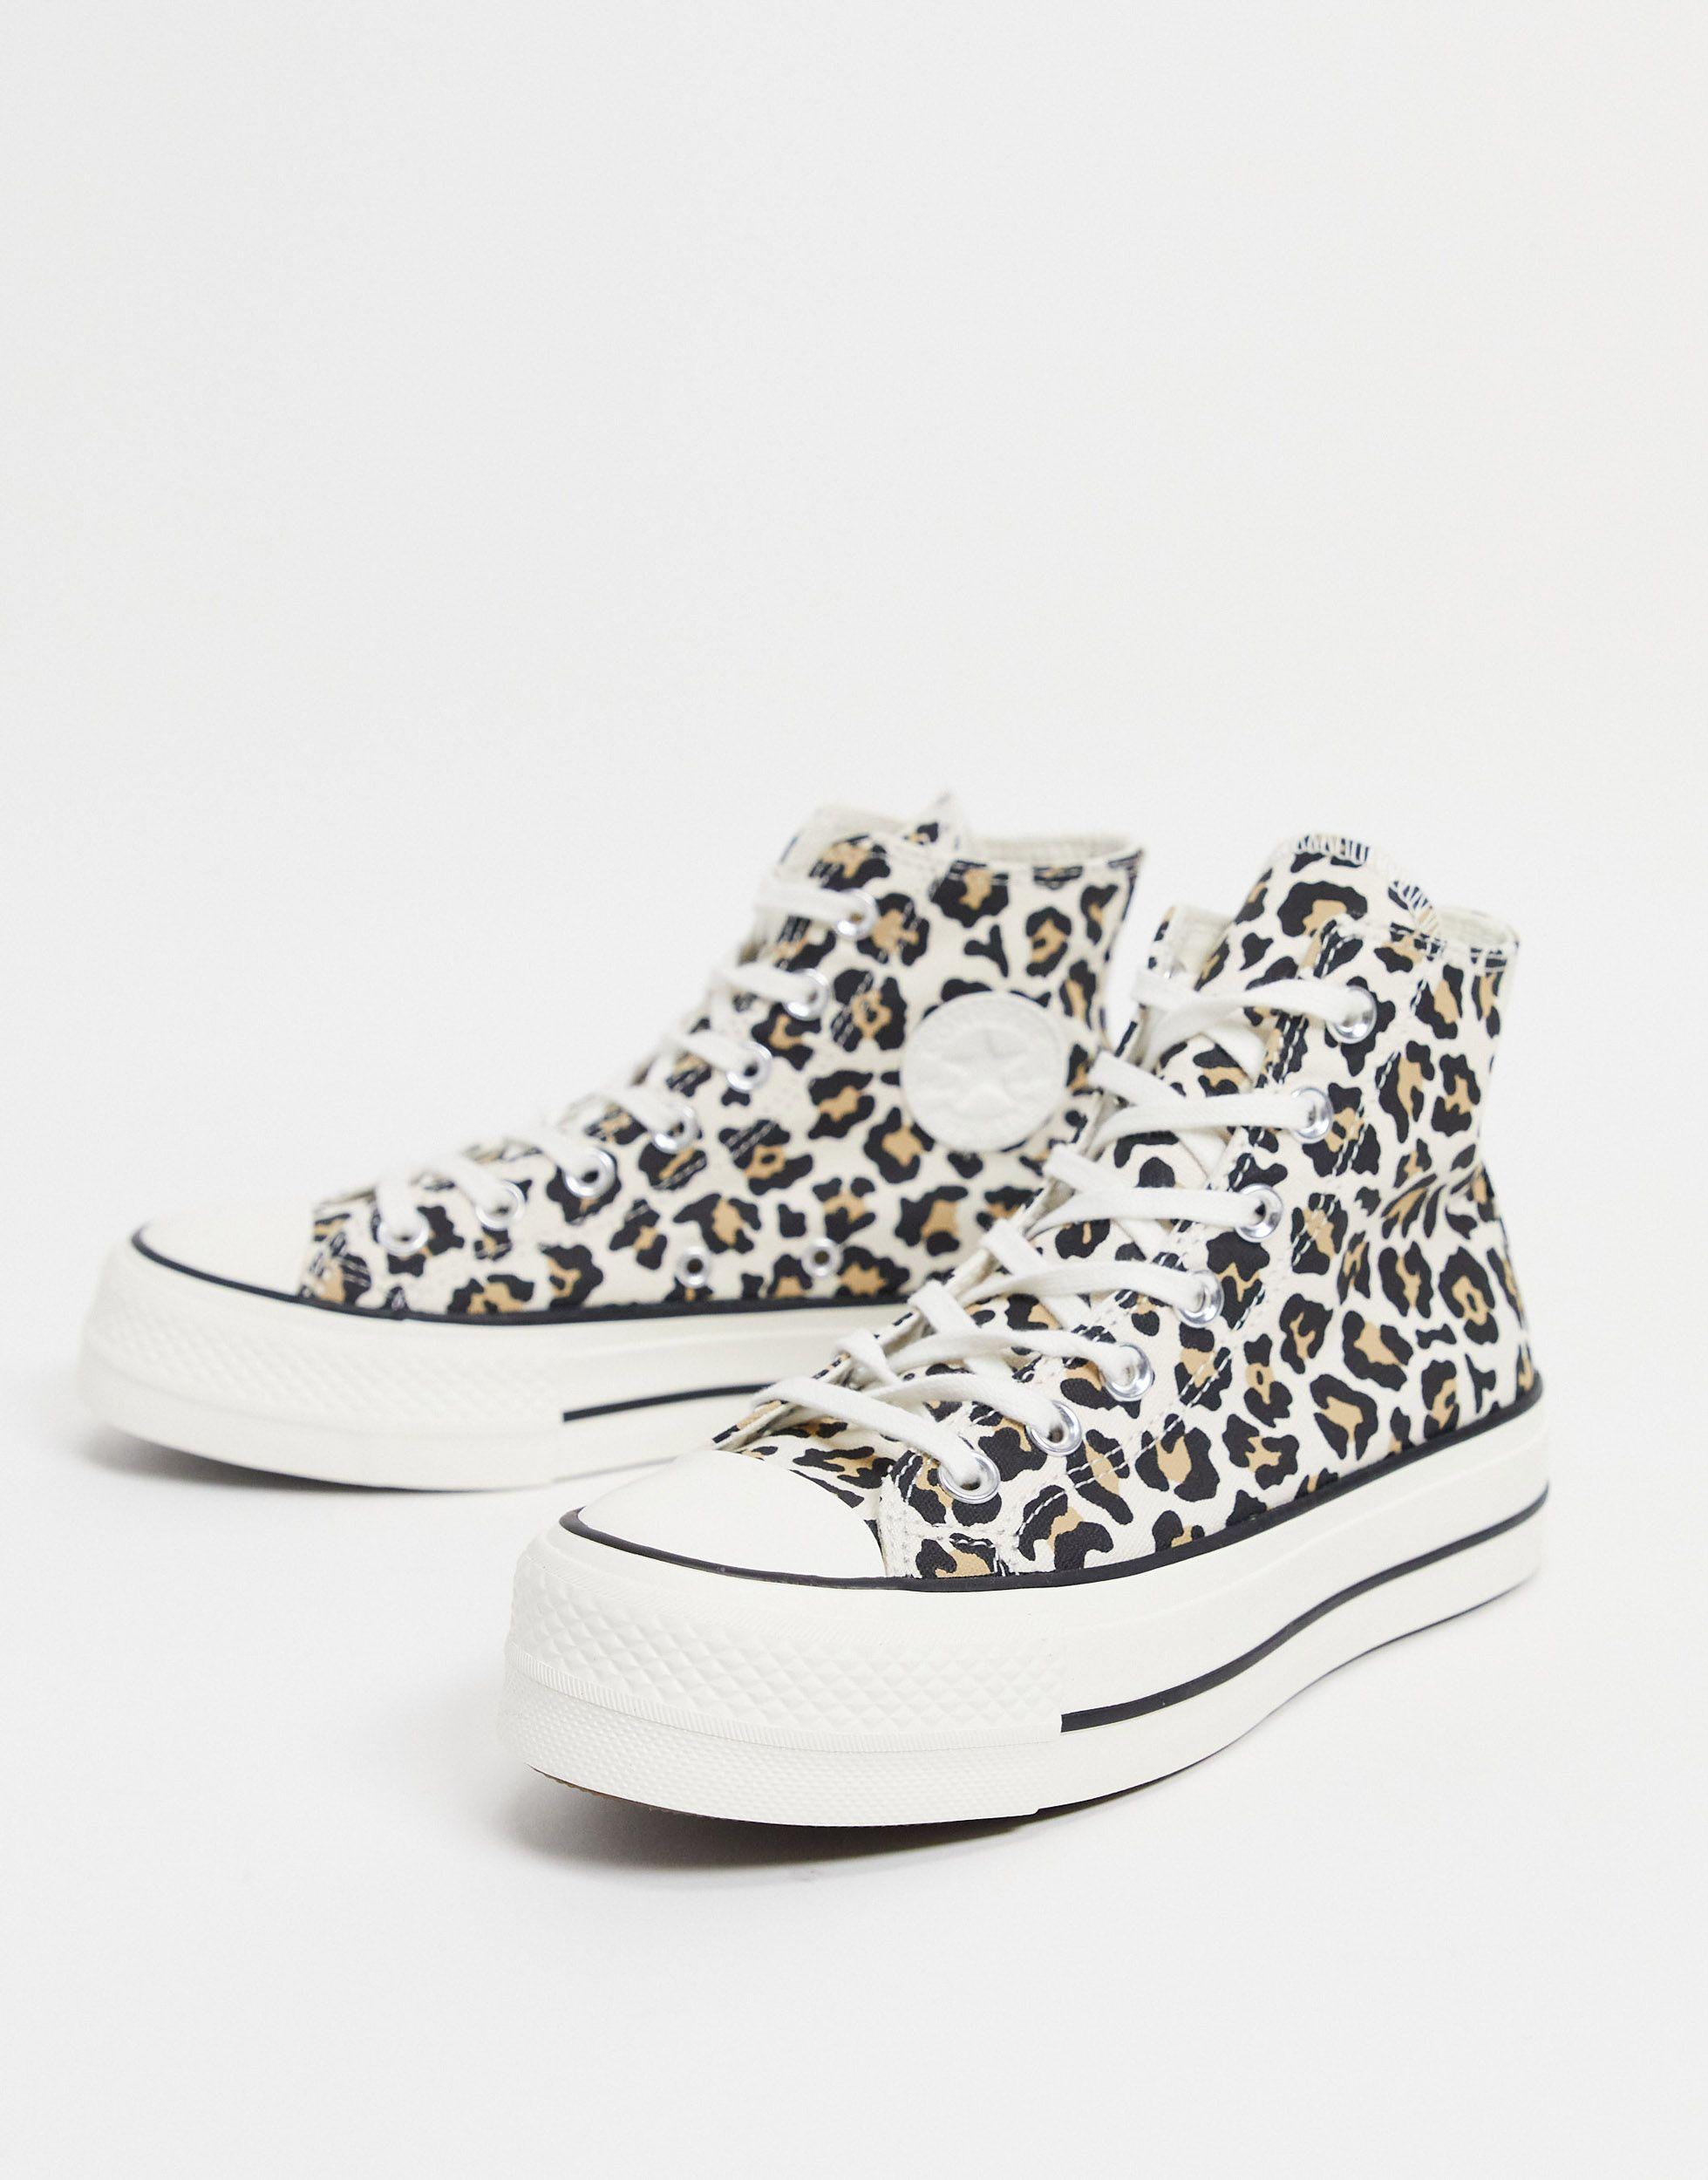 converse femme leopard, heavy trade UP TO 85% OFF - statehouse.gov.sl